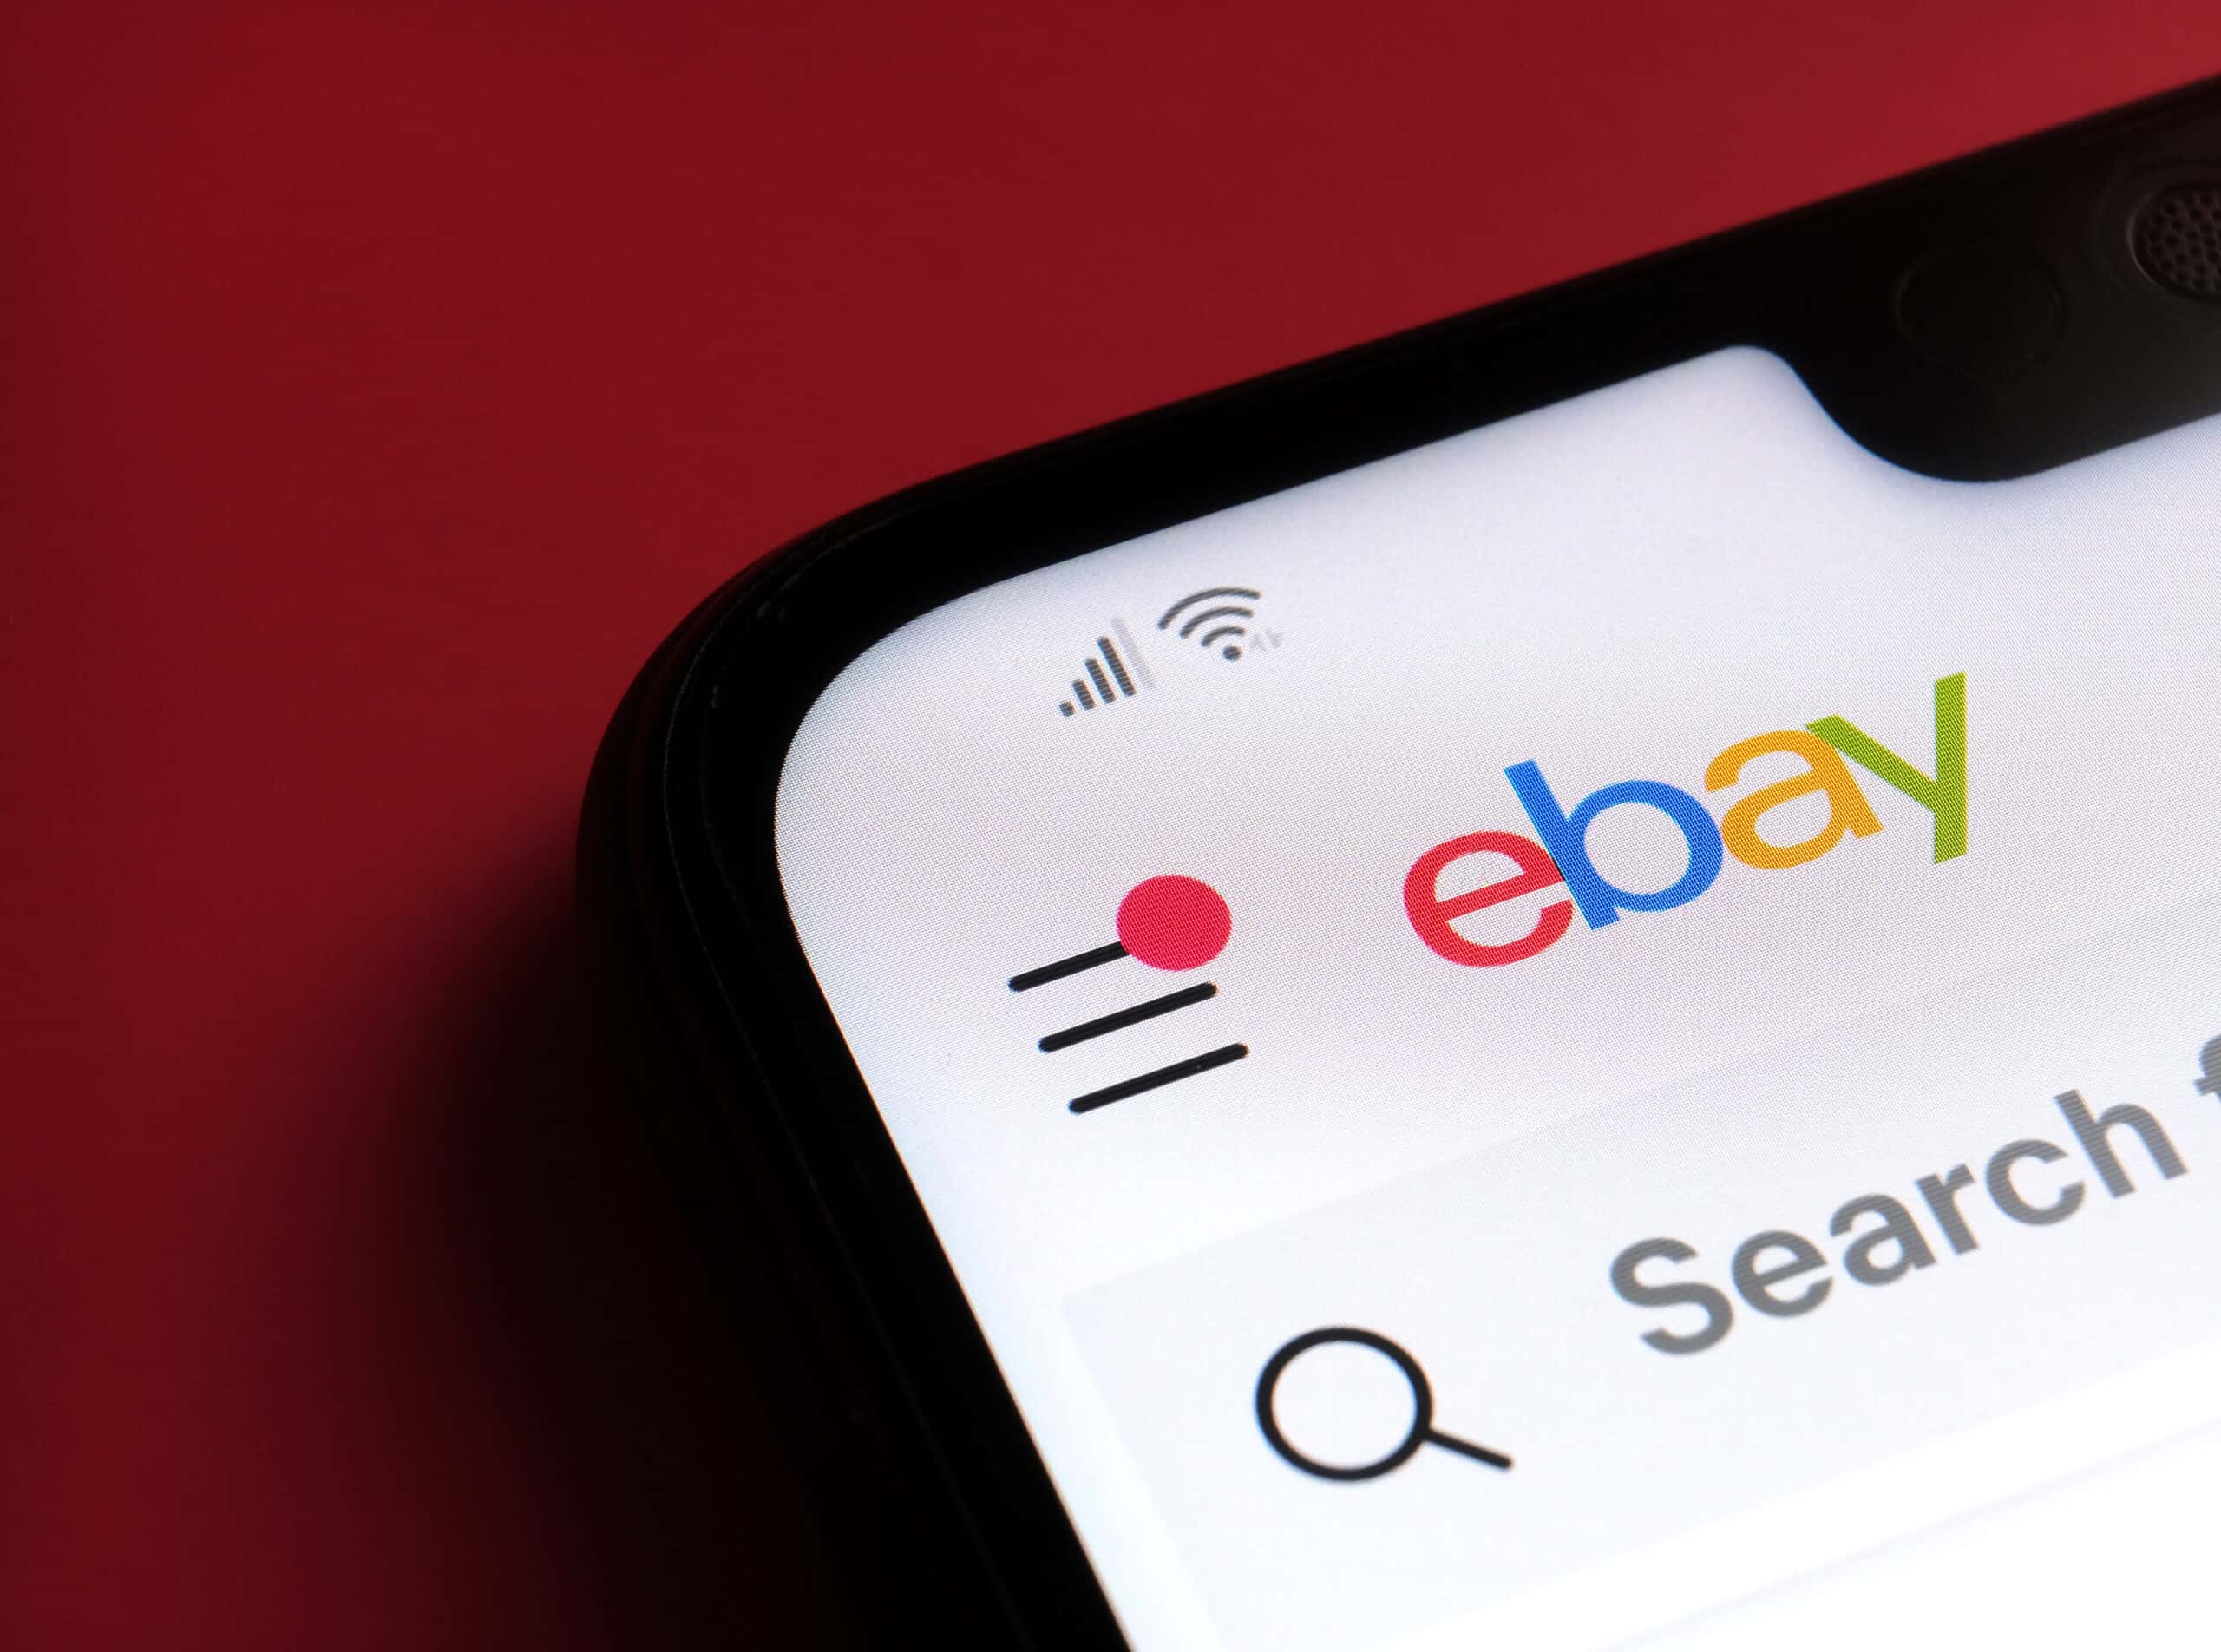 ebay-users-can-now-use-face-id-on-iphone-x-to-make-purchases